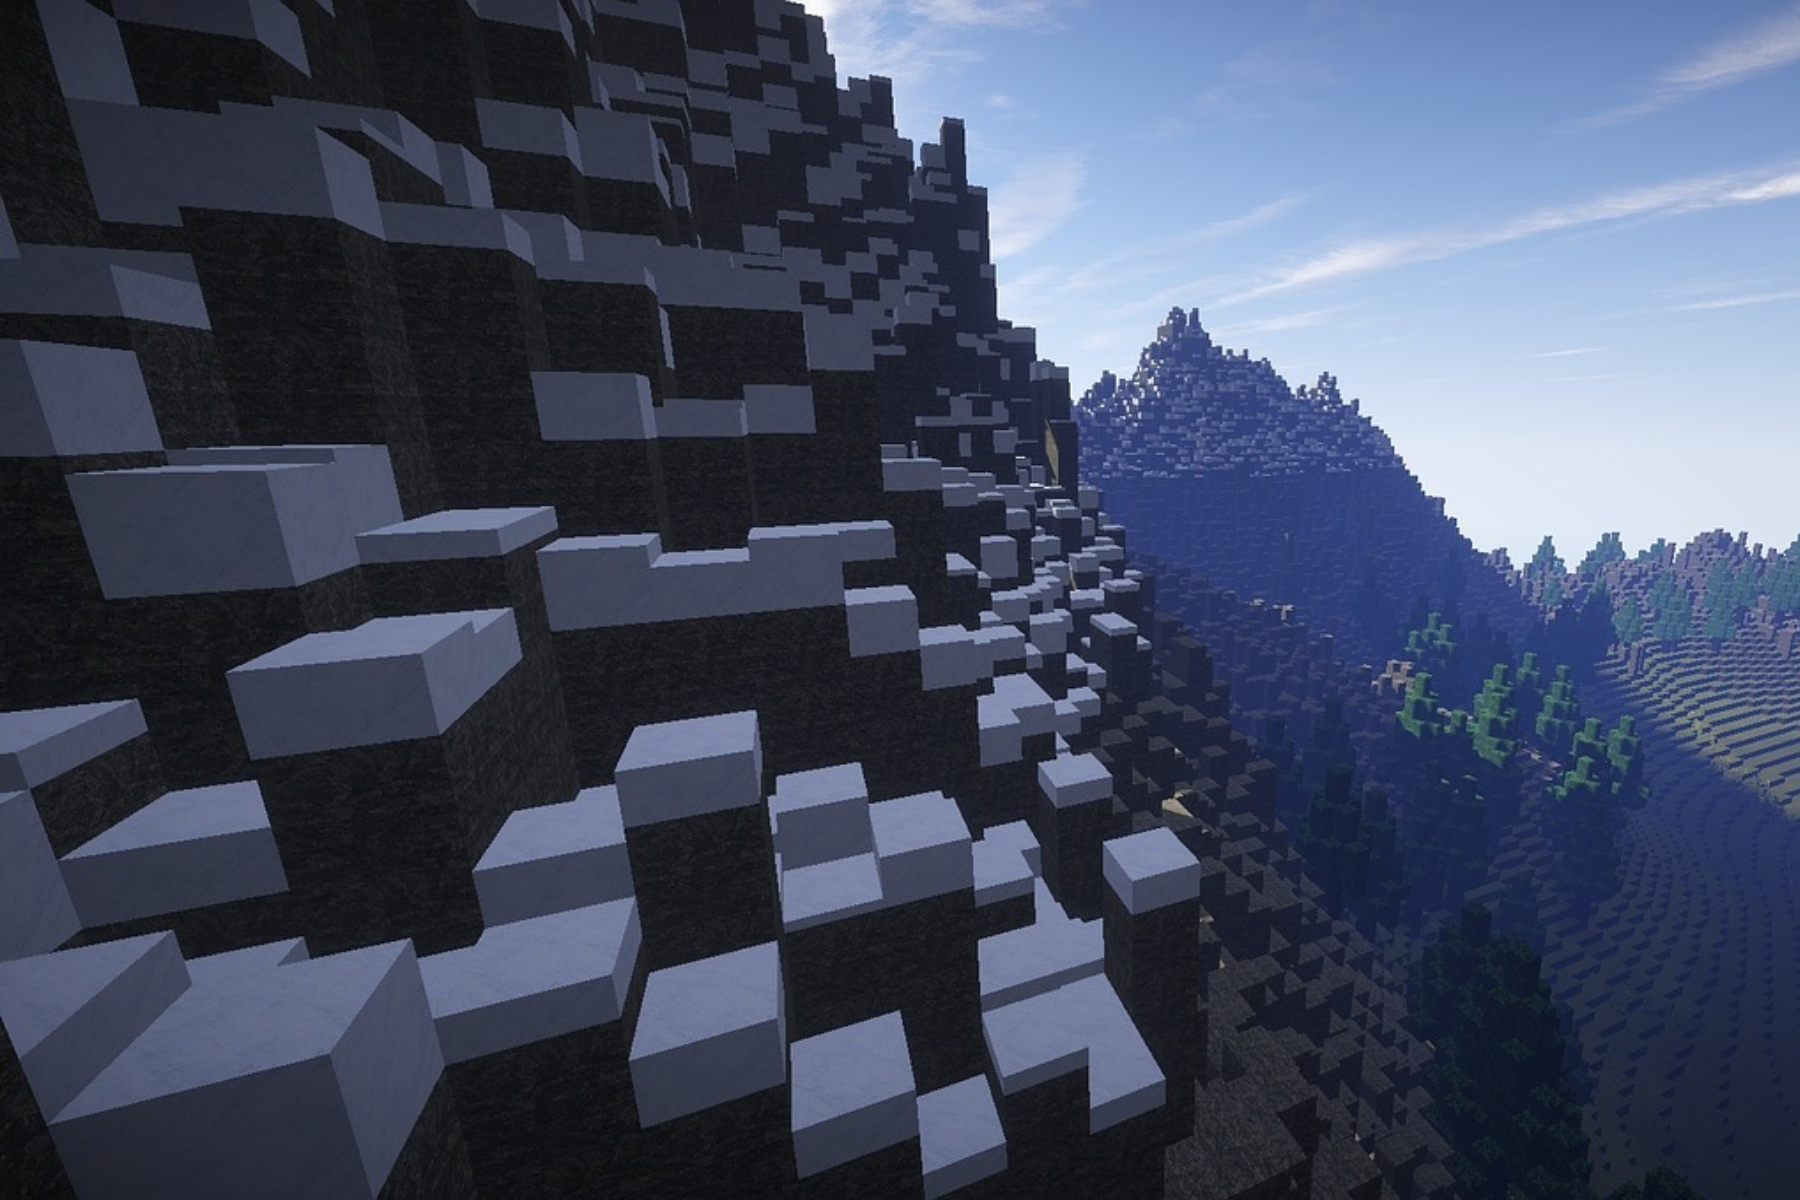 A mountain in Minecraft